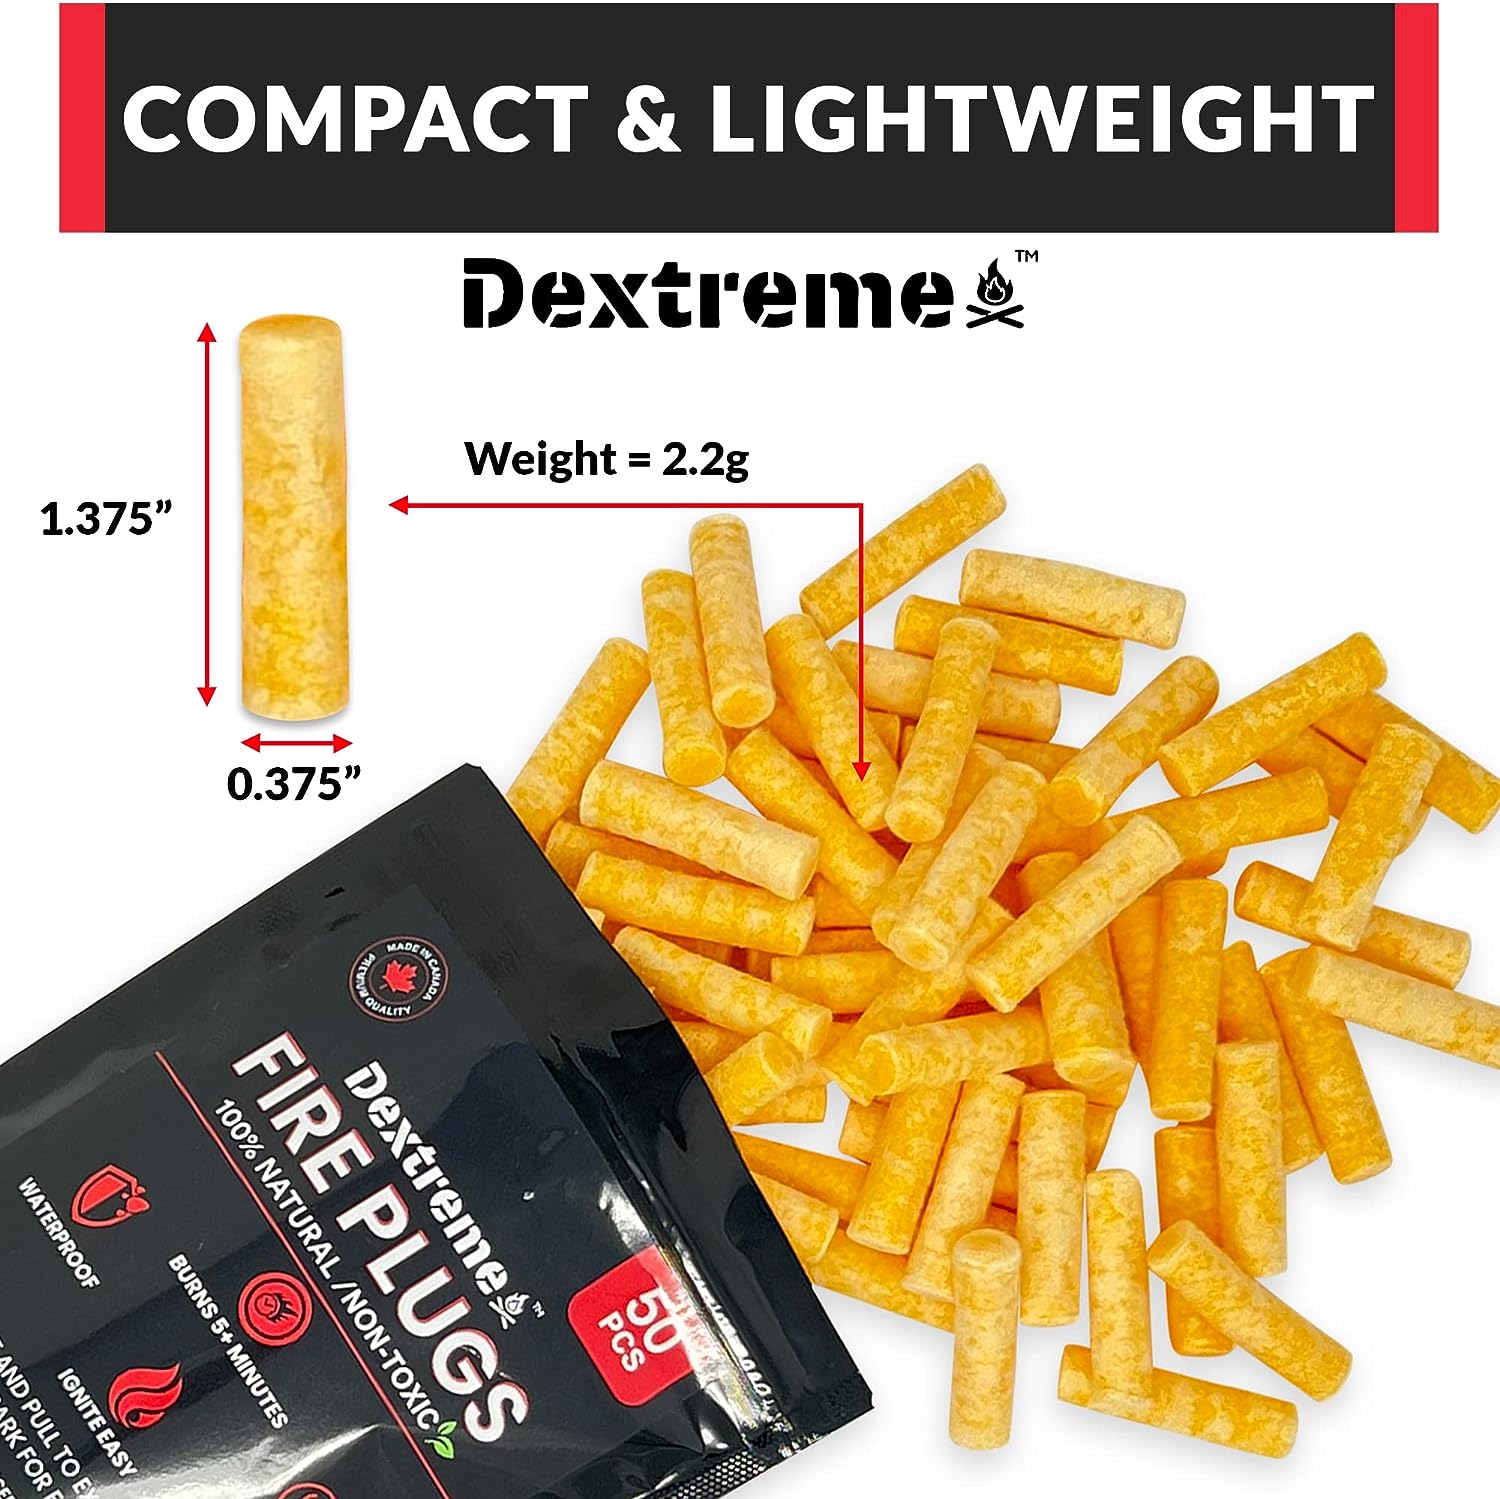 Dextreme Fire Plugs (50) Waterproof Fire Starter for Campfires, Emergencies, Survival, Fire Pits, Grills | 5+ Minute Burn | All Natural